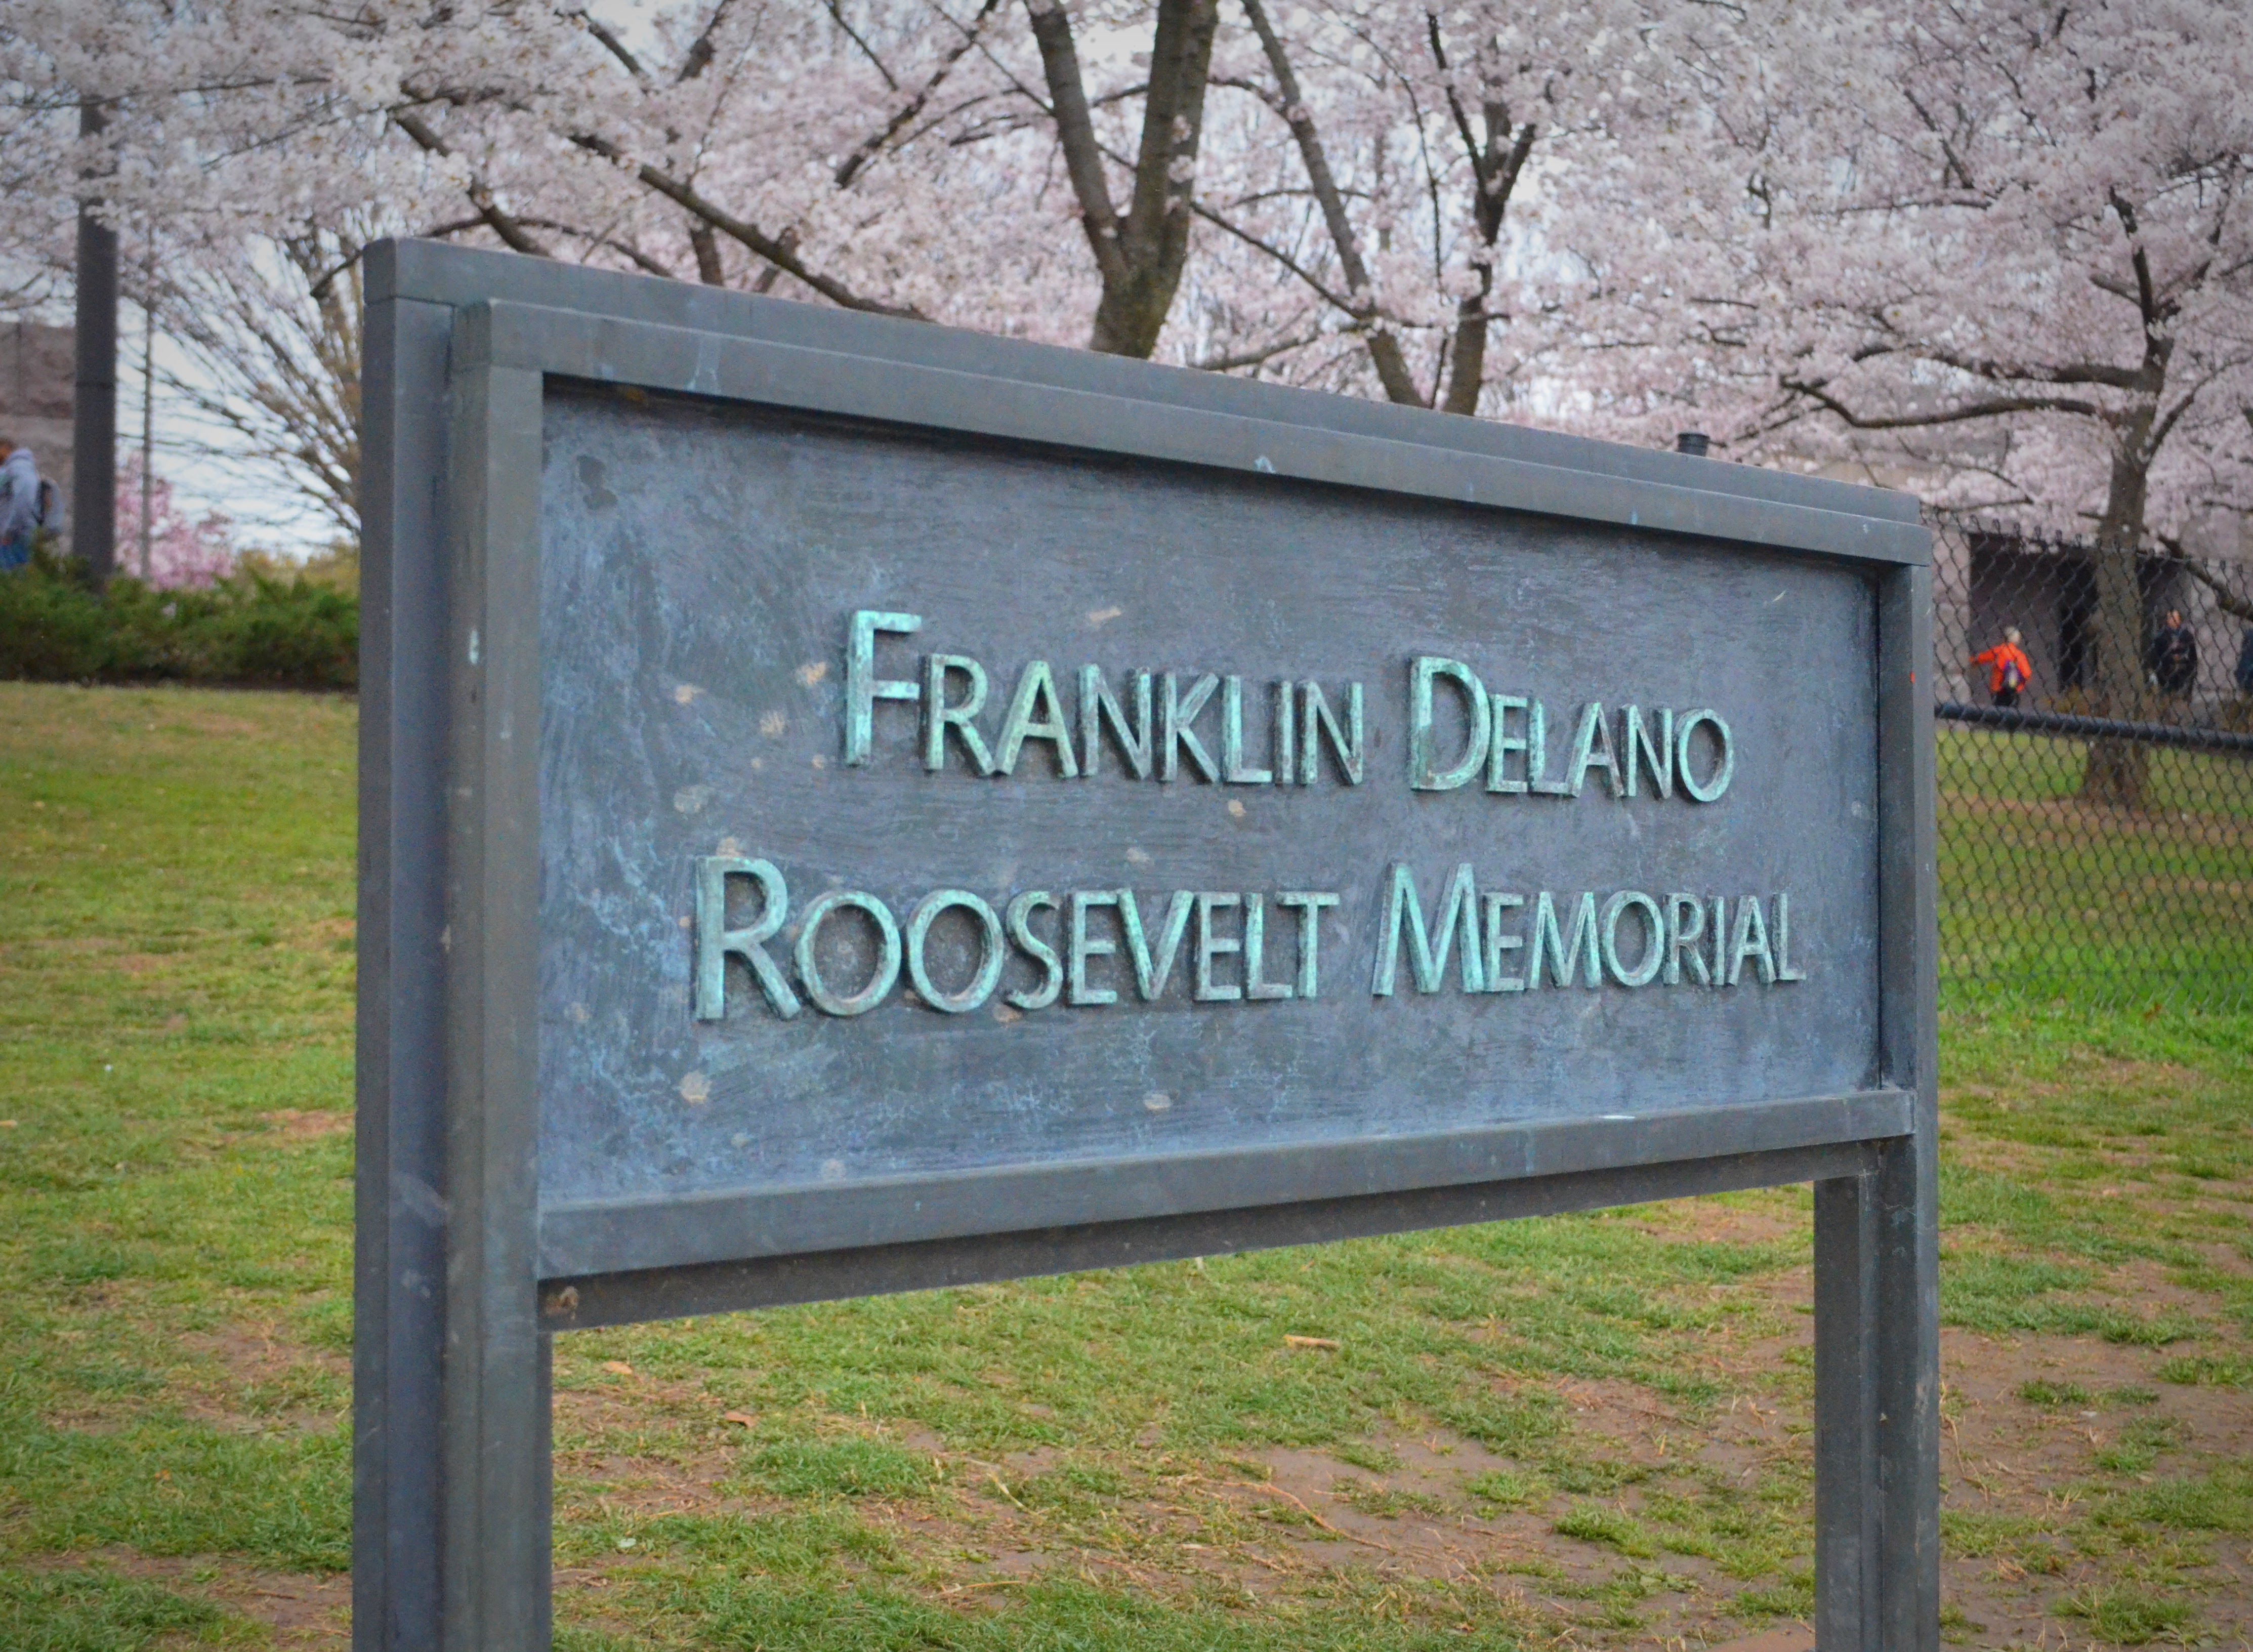 Blue sign with franklin delano roosevelt memorial written on it with cherry blossoms behind it, FDR, franklin delano roosevelt, FDR memorial, franklin delano roosevelt memorial, fdr memorial dc, fdr memorial washington dc, franklin delano roosevelt washington dc, franklin delano roosevelt washington dc, washington dc, dc, dc monuments, dc memorials, dc photography, dc travel, dc history, dc travel blog, dc traveling blog, dc travel photography, dc travels, traveling in dc, traveling in washington dc,